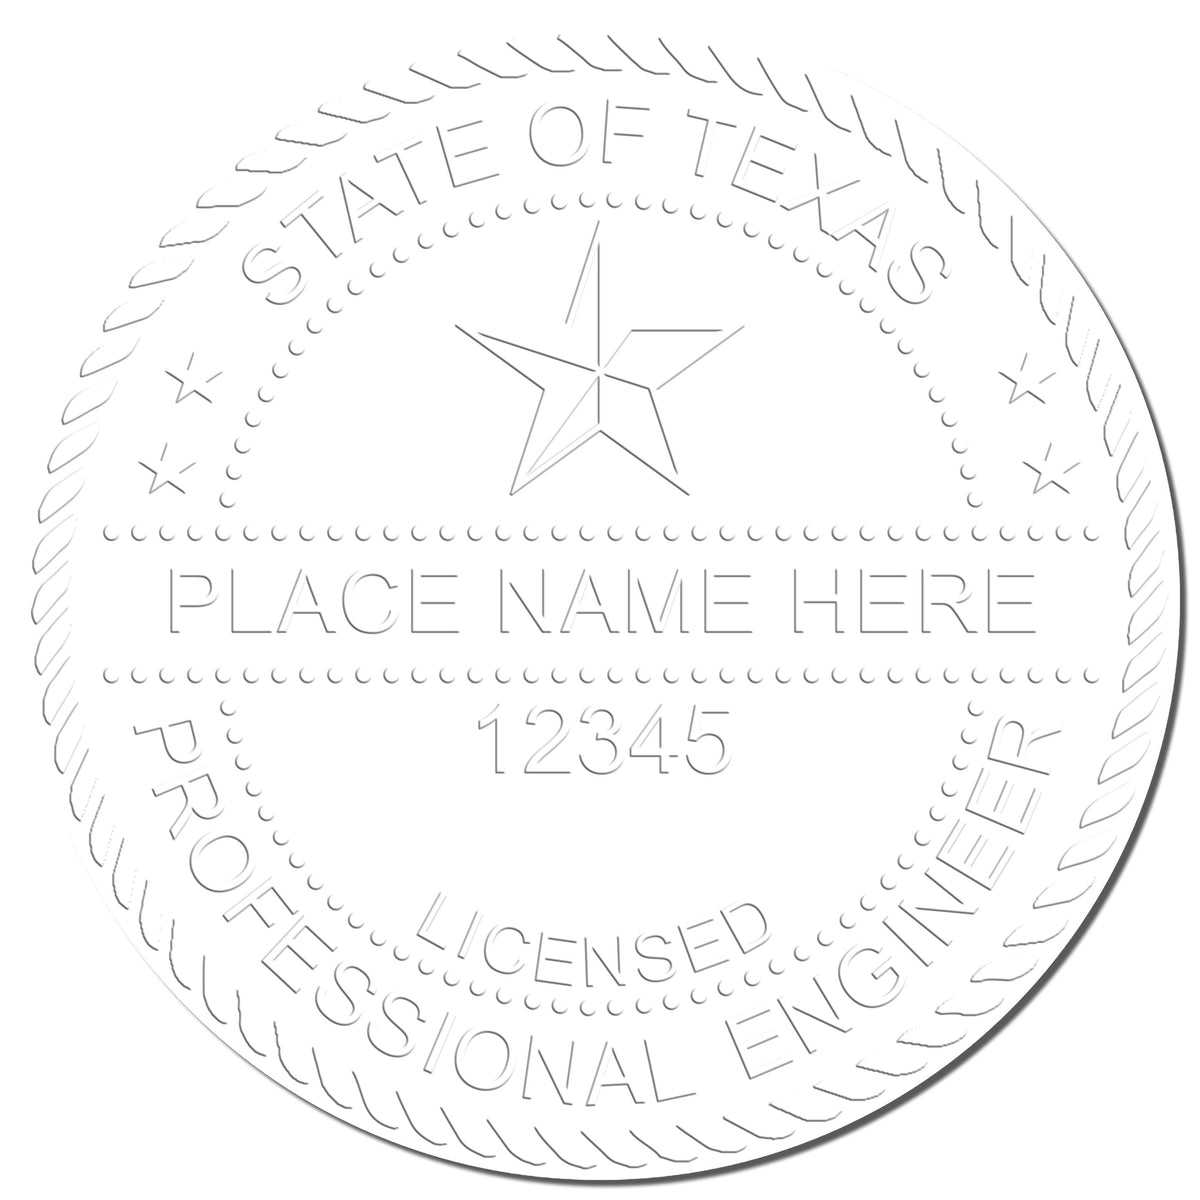 This paper is stamped with a sample imprint of the State of Texas Extended Long Reach Engineer Seal, signifying its quality and reliability.